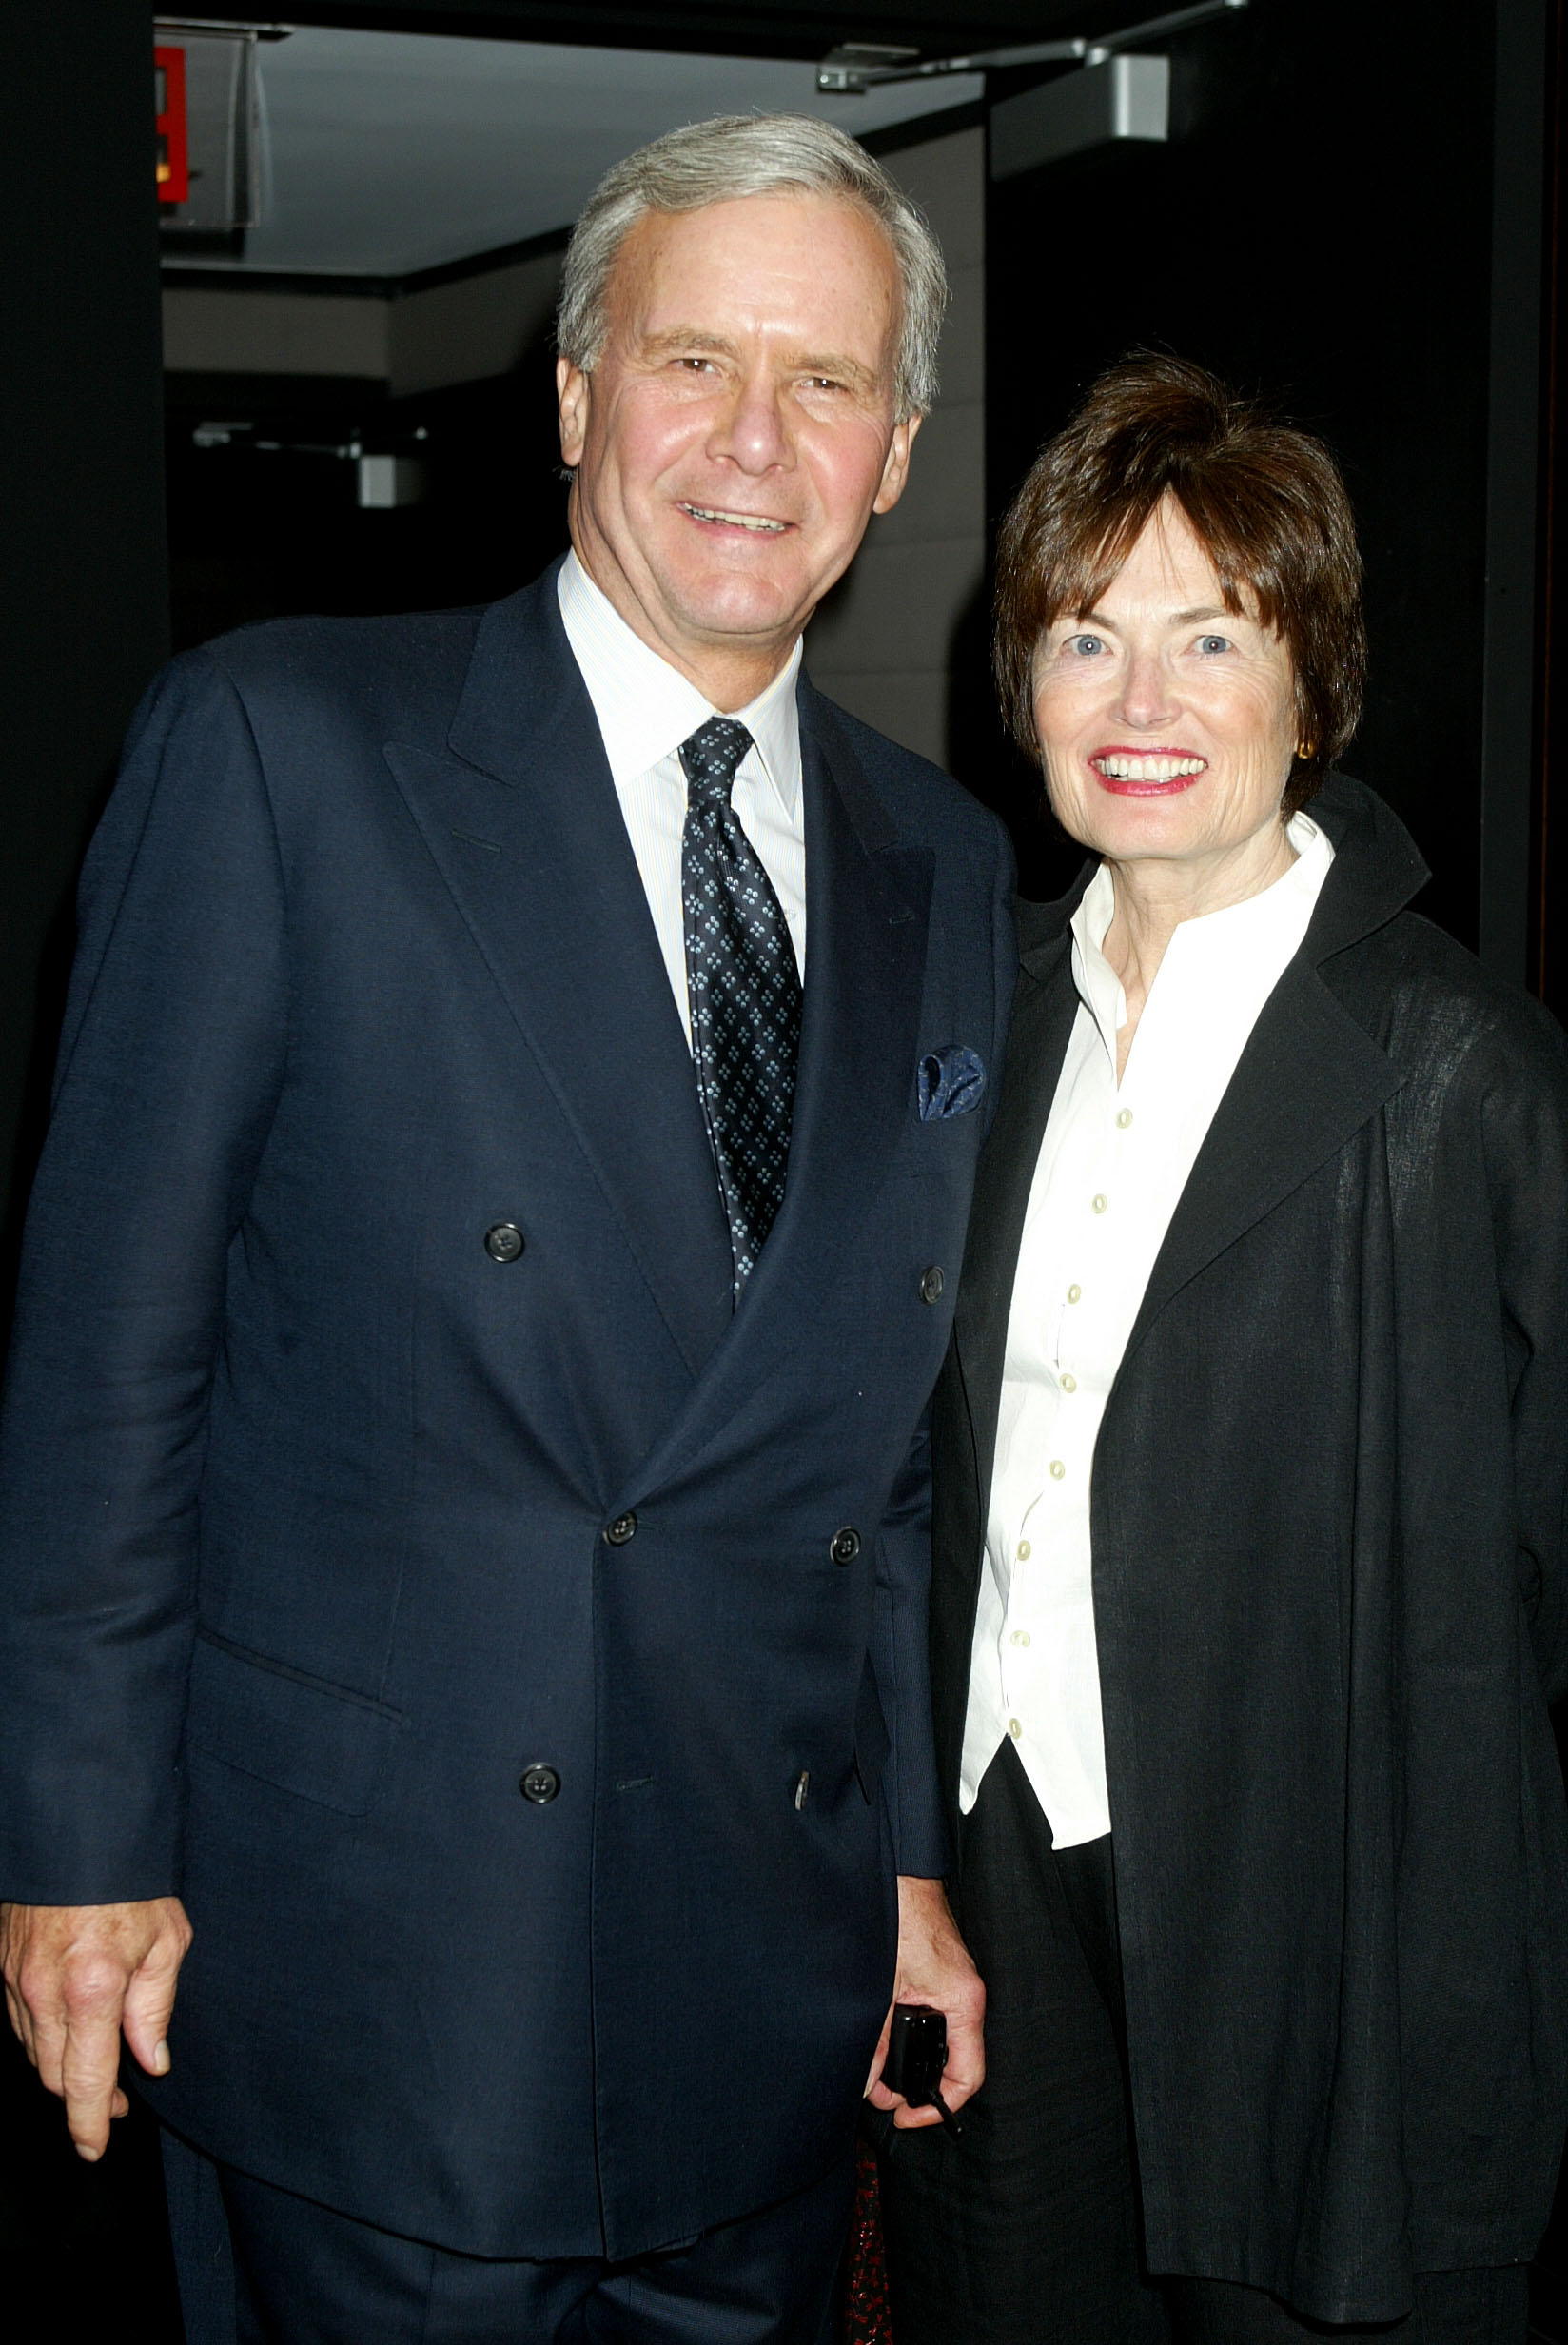 Tom Brokaw and Merideth Auld at the screening of "My Big Fat Greek Wedding" at New York's Bryant Park Hotel on April 17, 2002 | Source: Getty Images